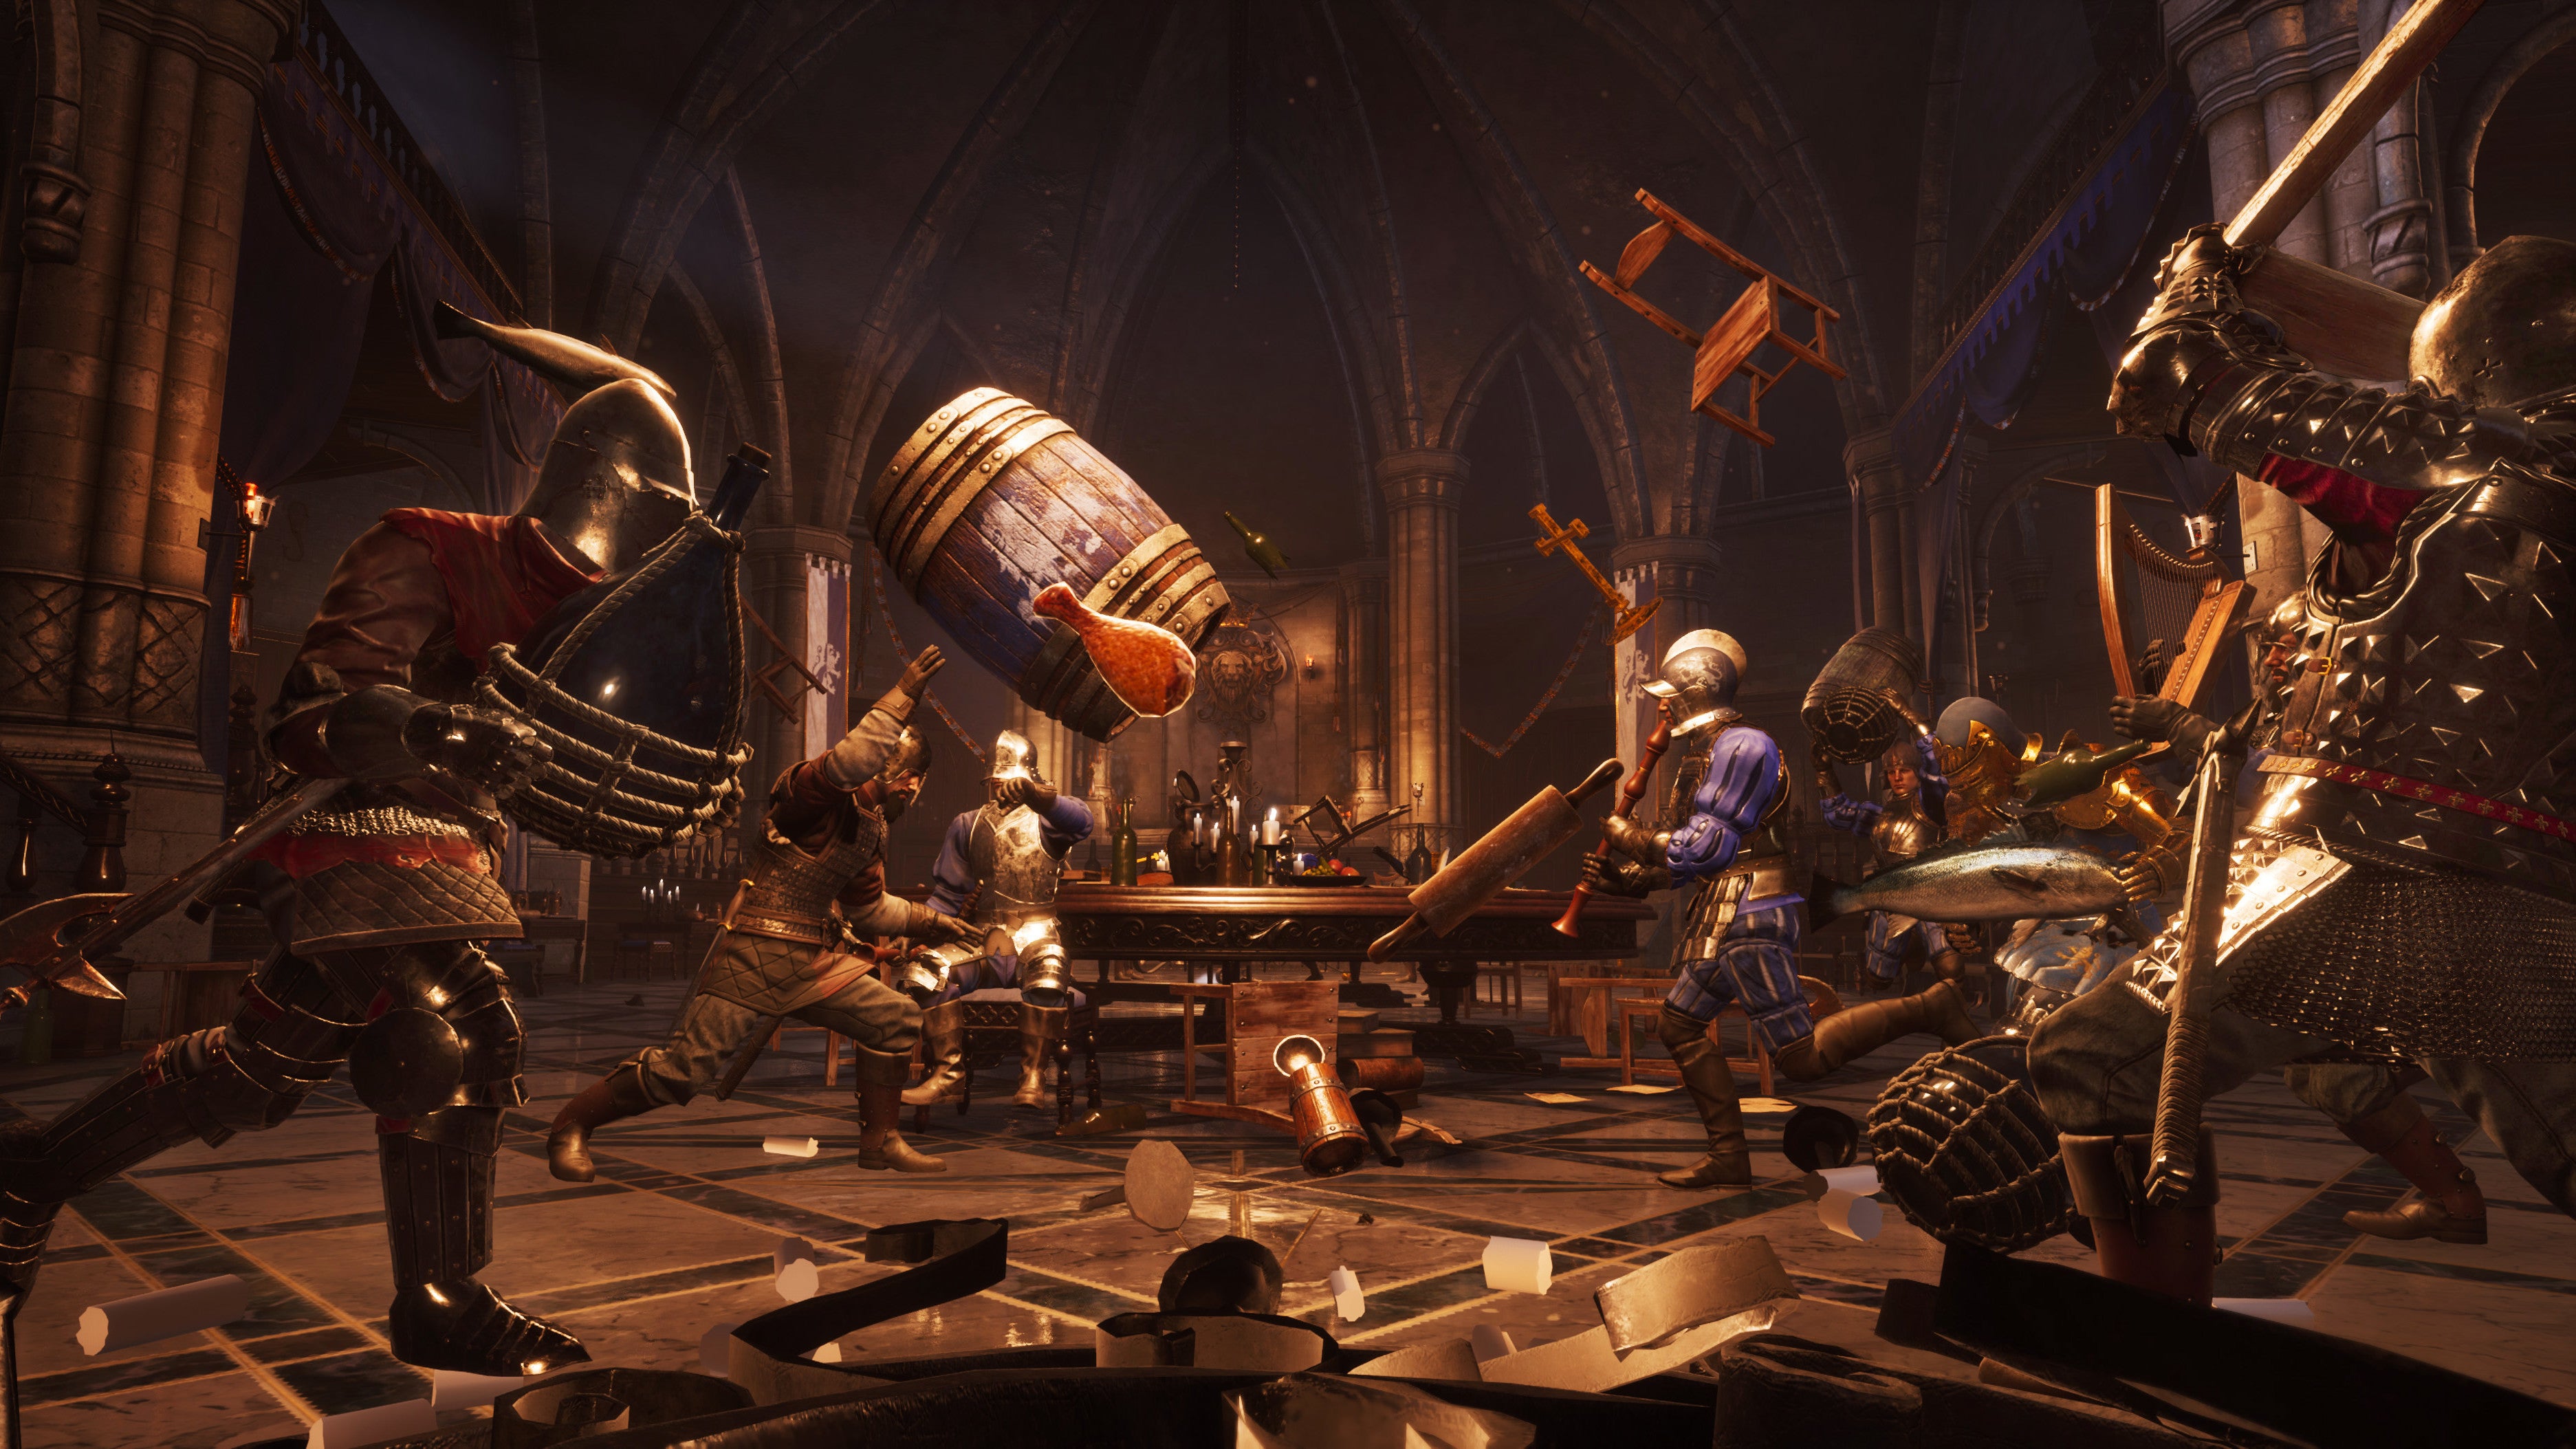 Stools, food, and other improvised tavern brawl weapons fly in a Chivalry 2 screenshot.